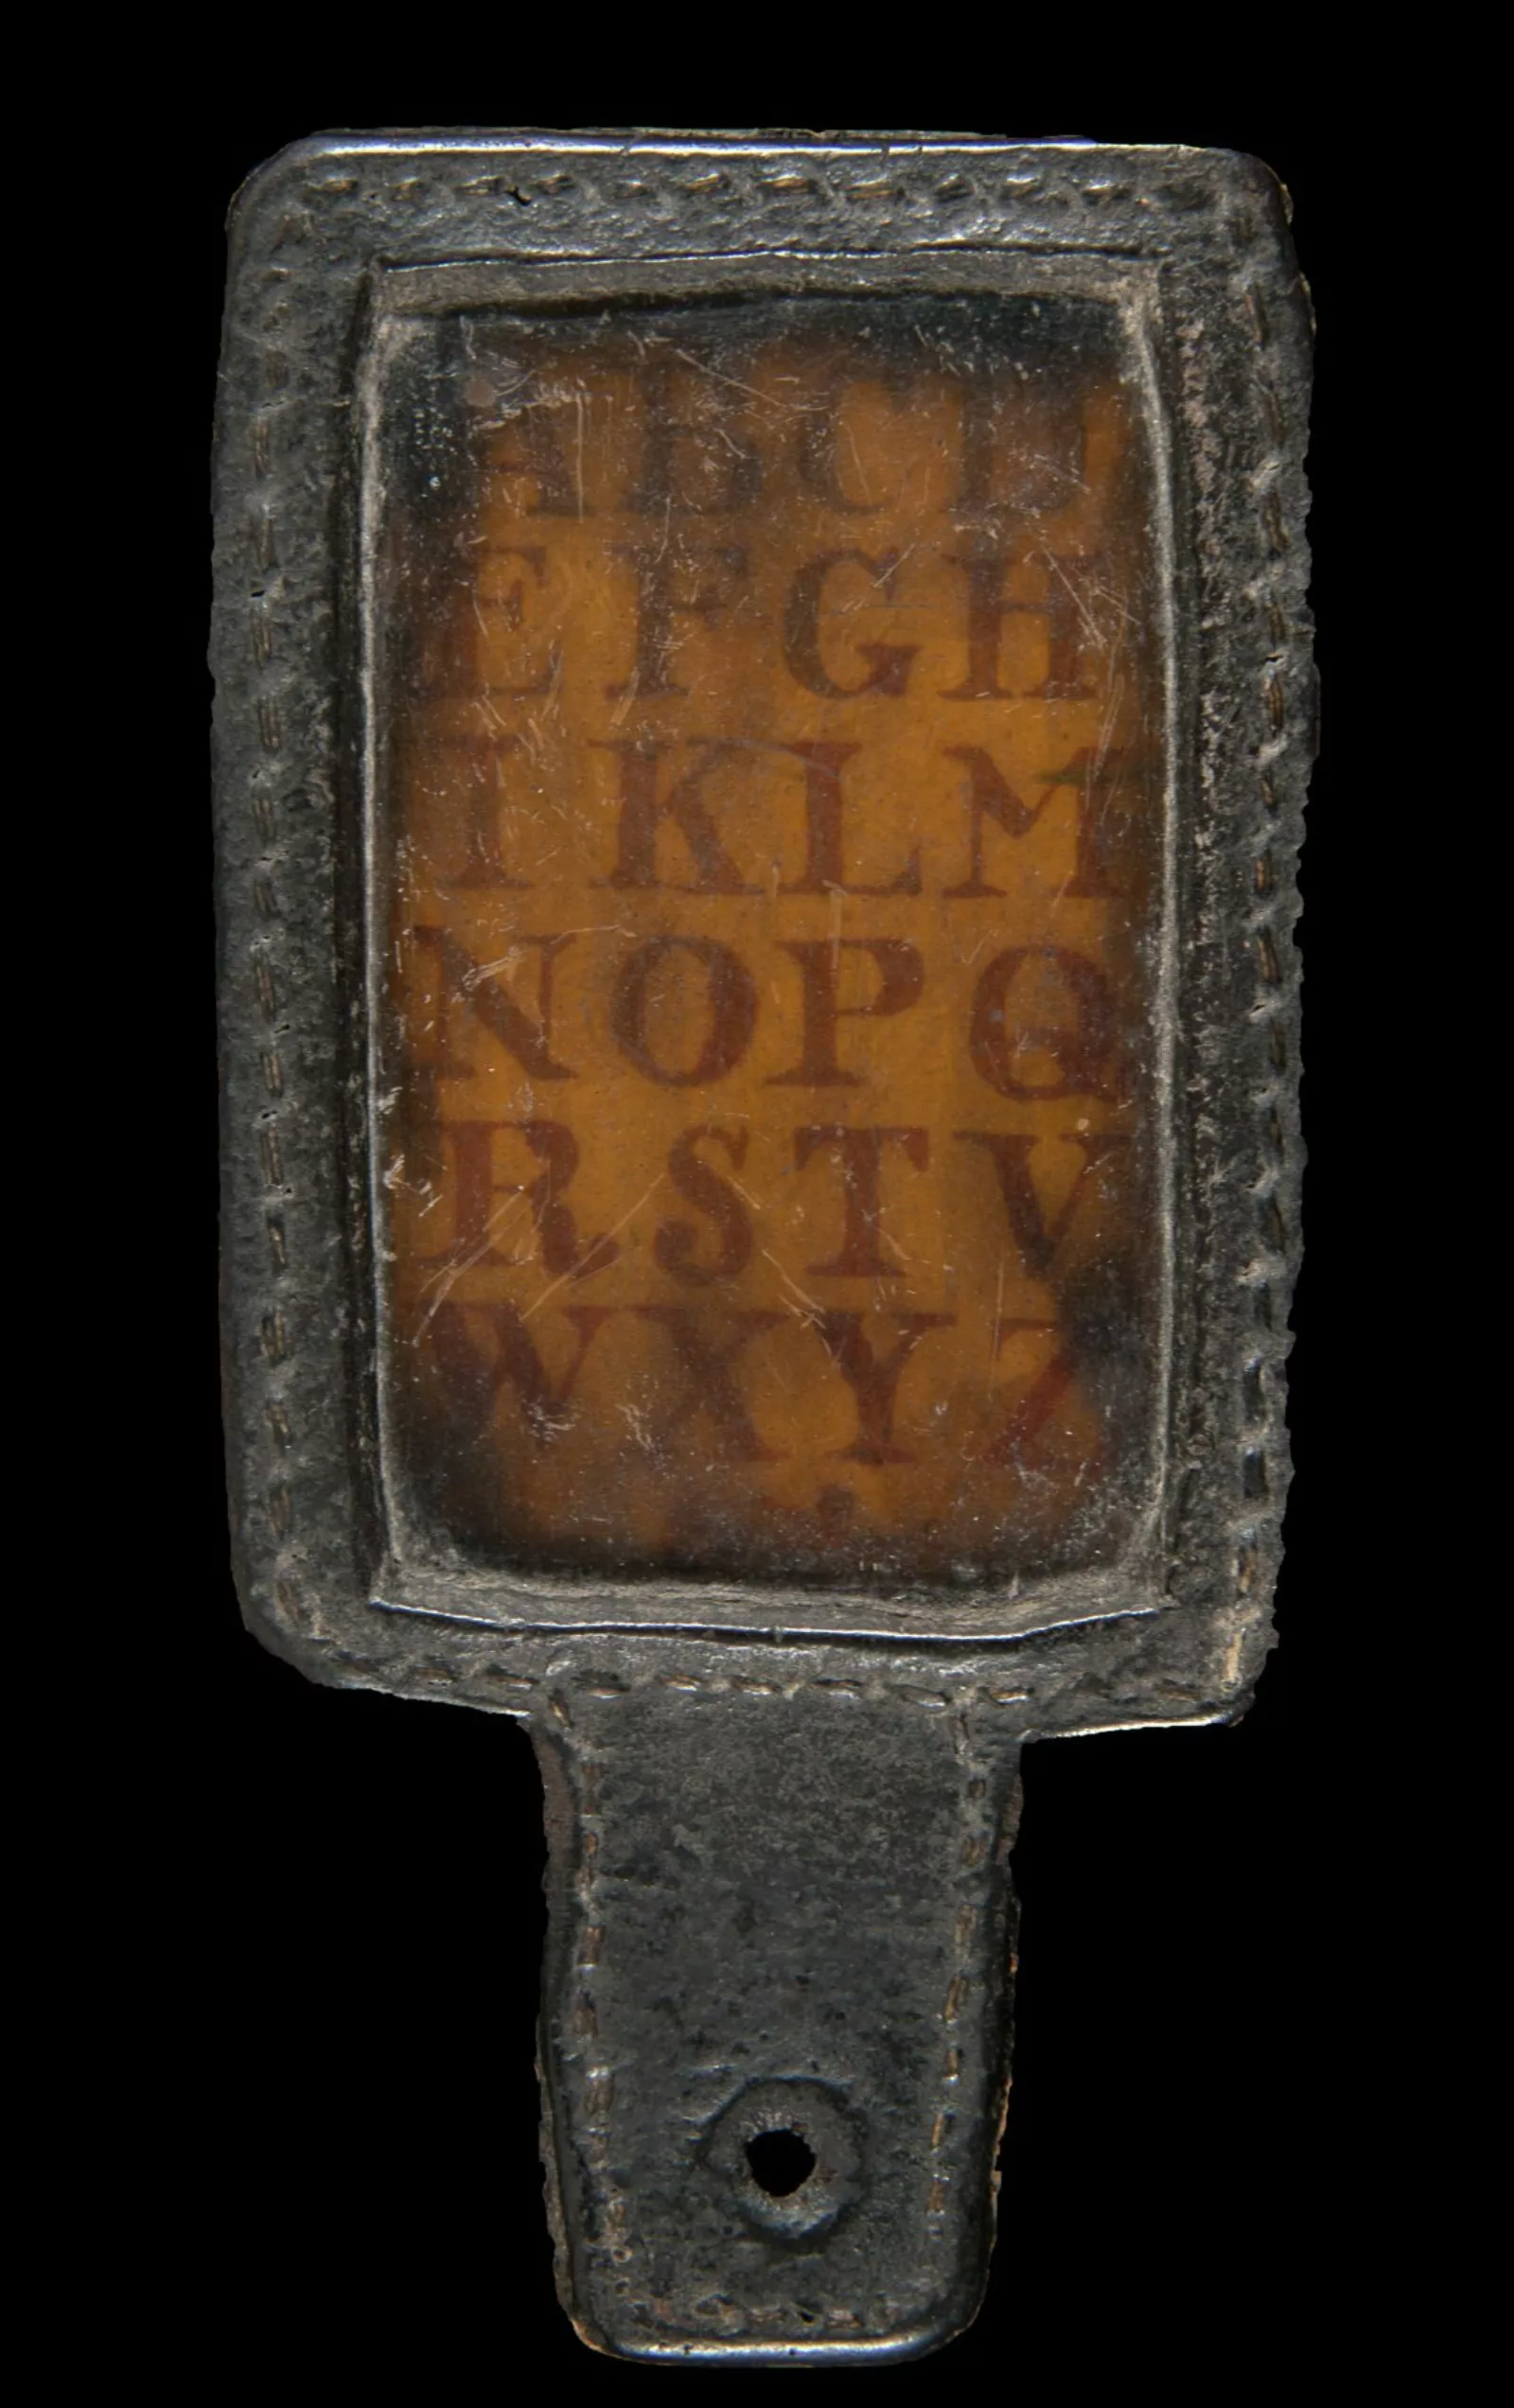 A small wooden paddle has a transparent screen running vertically. Under the screen is the alphabet. At the base of the paddle is a small hole.